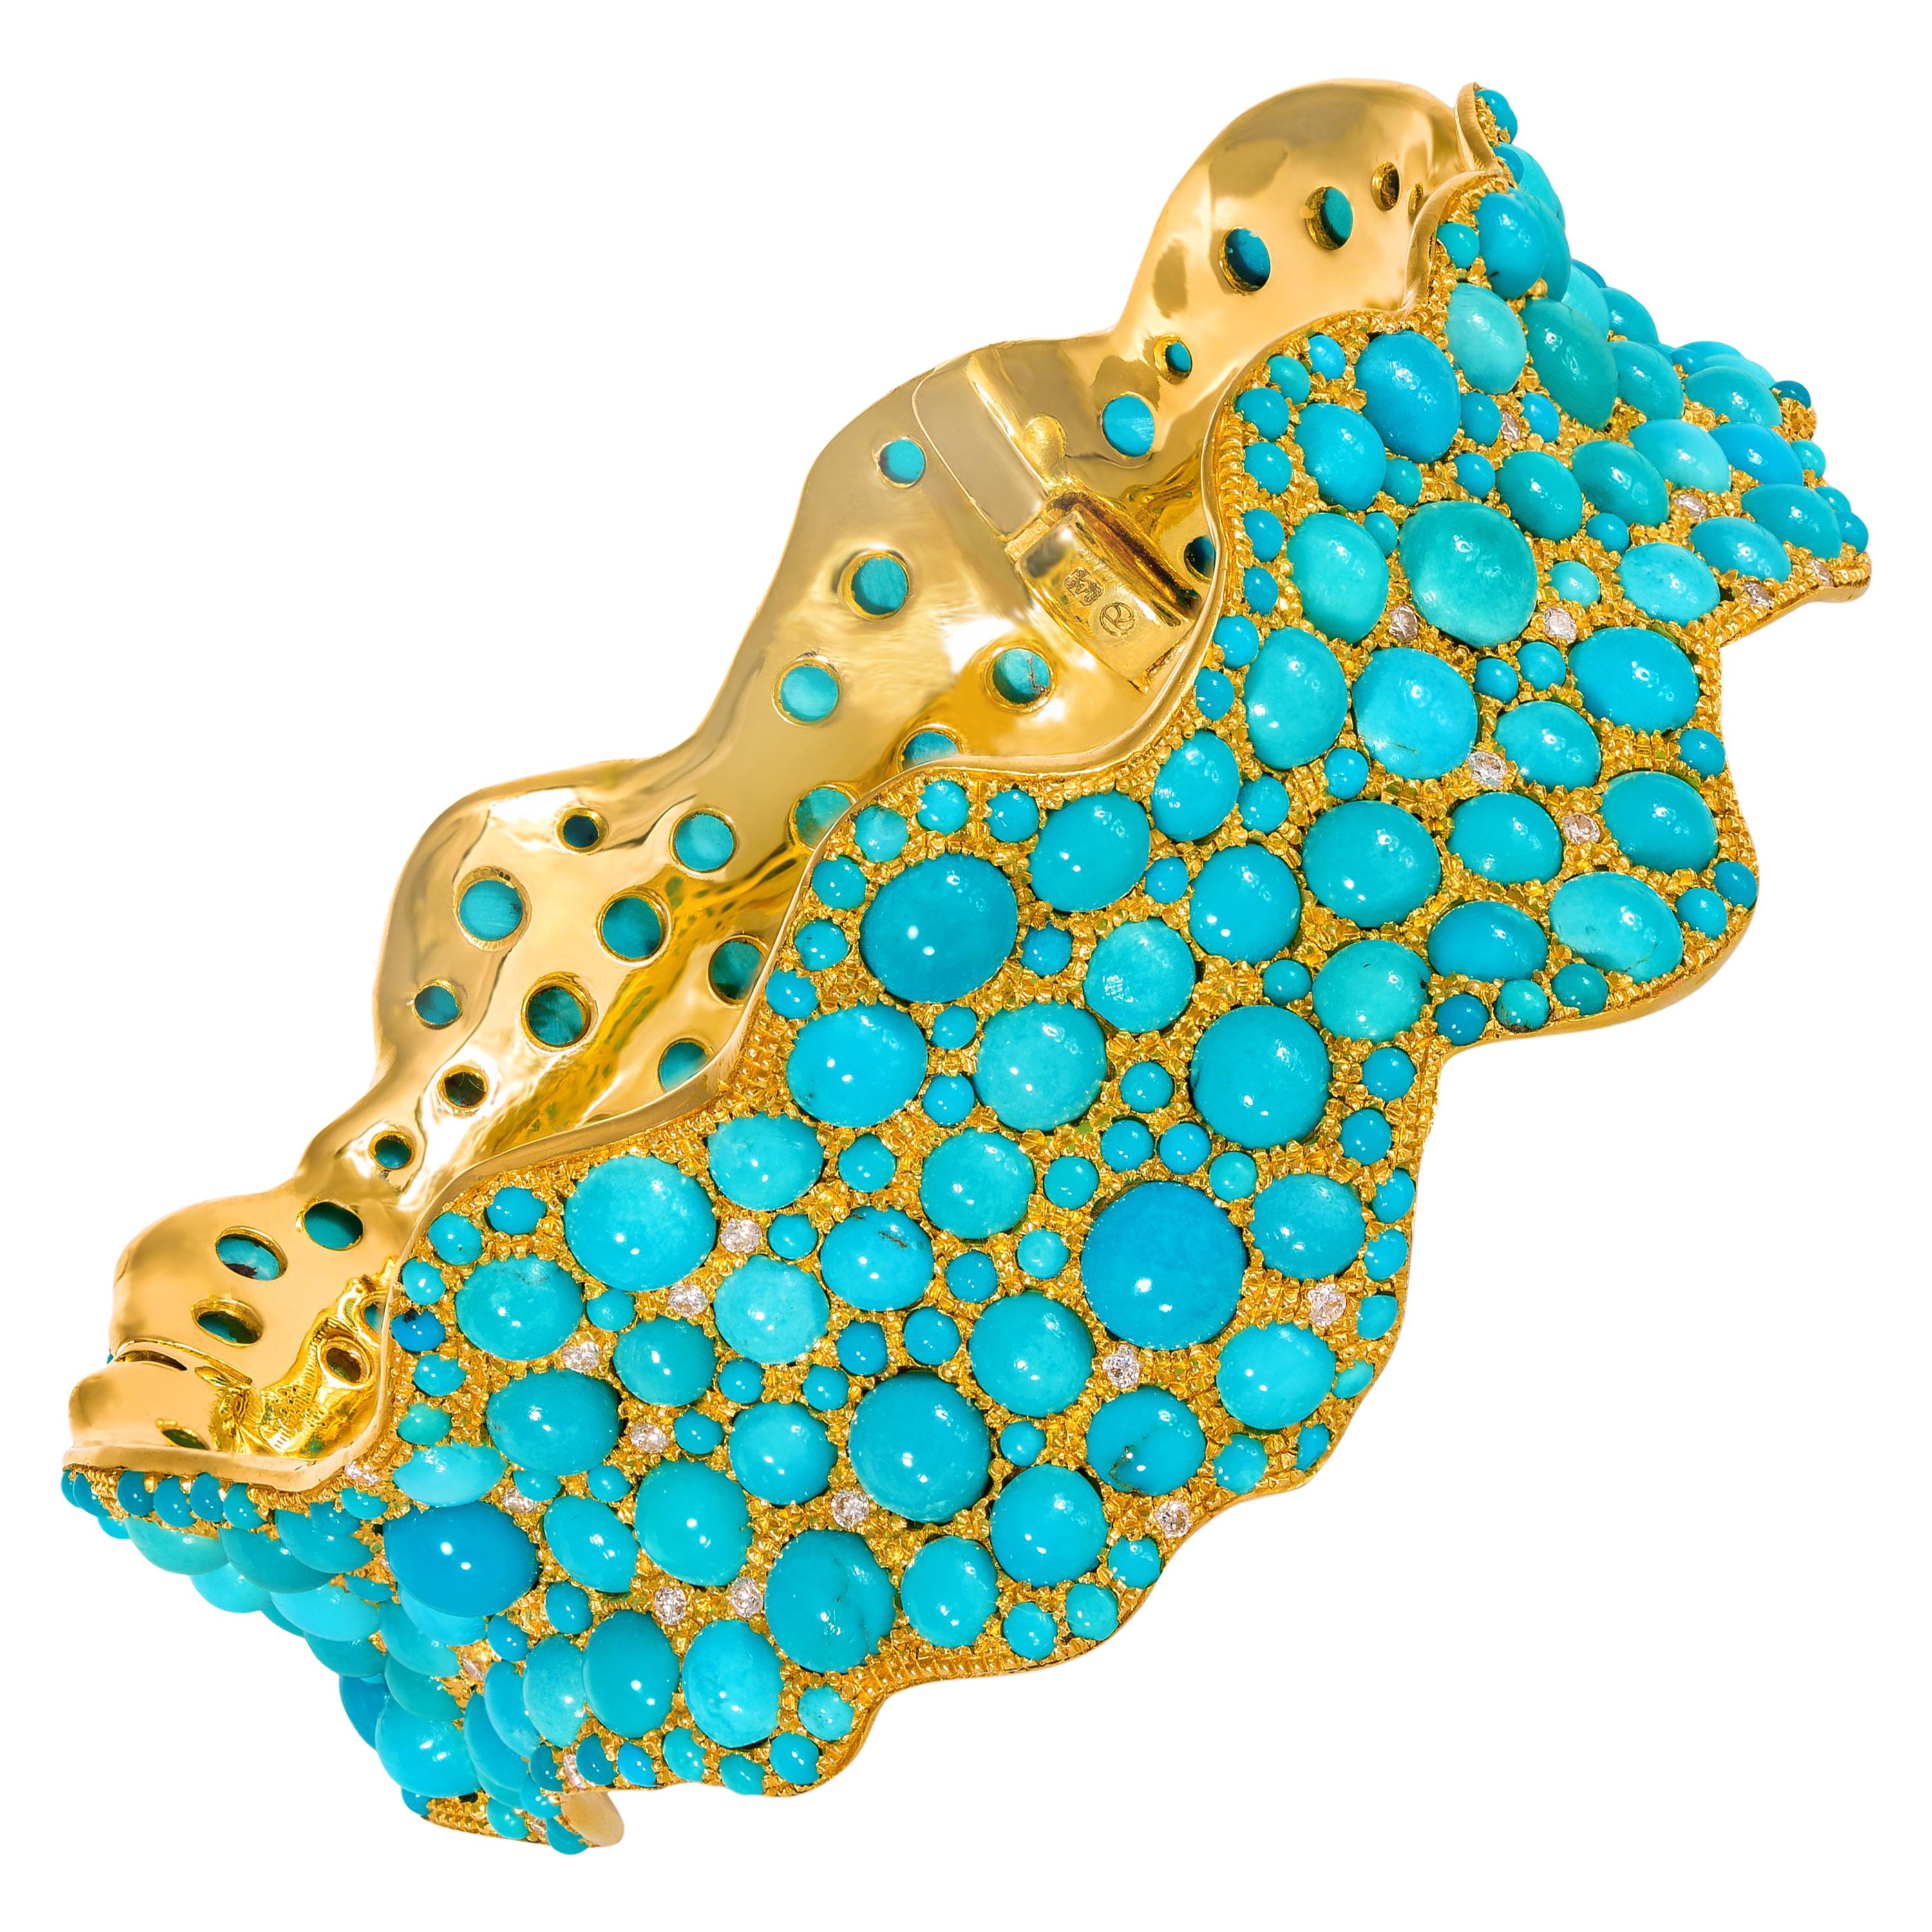 Rosior one-off Turquoise and Diamond Bangle Bracelet set in Yellow Gold